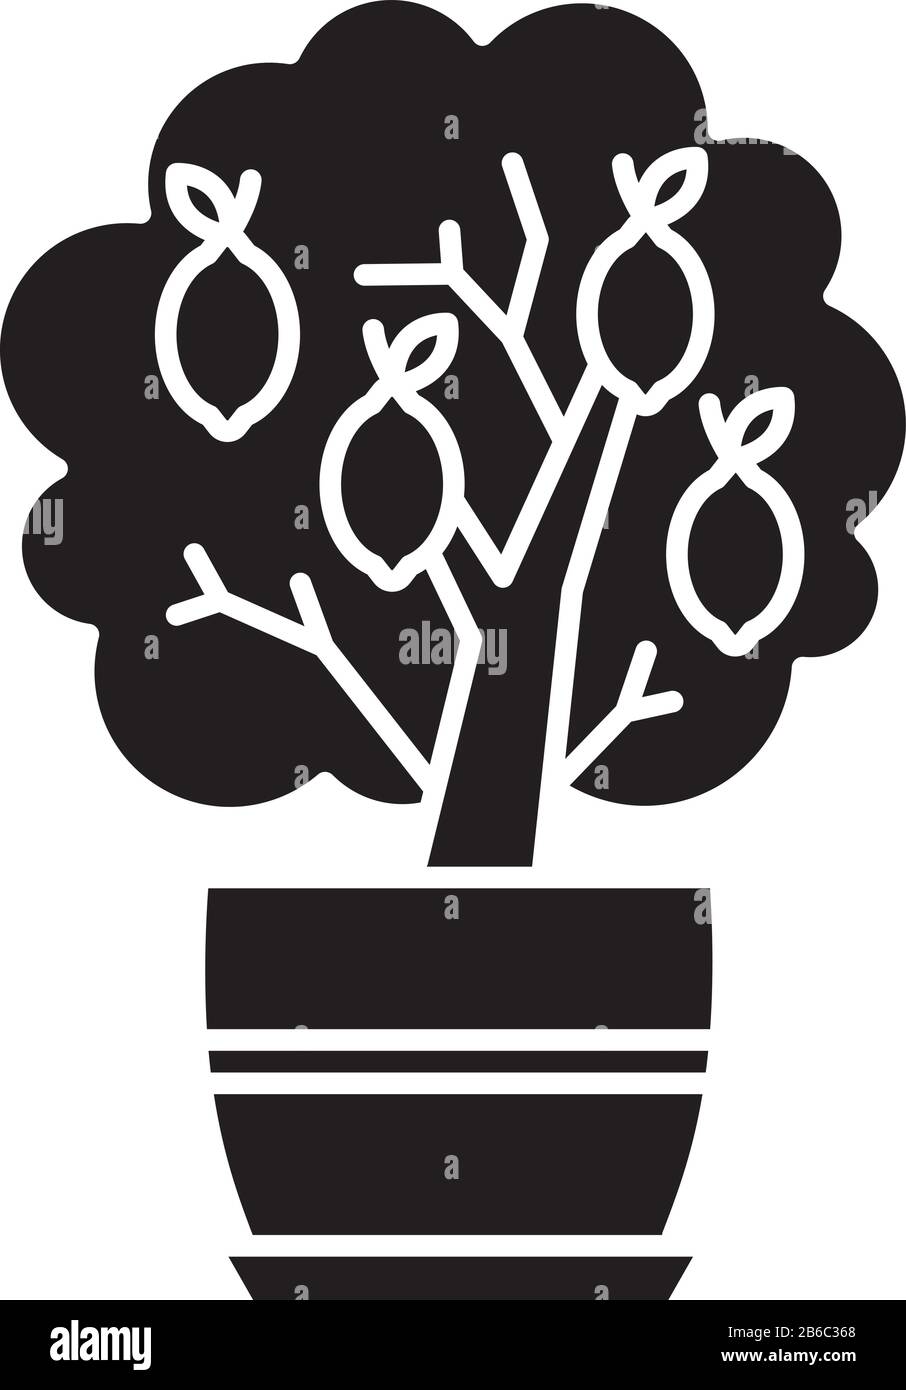 Miniature lemon tree black glyph icon. Potted evergreen citrus. Indoor plant with yellow fruit. Decorative fruiting houseplant. Silhouette symbol on Stock Vector